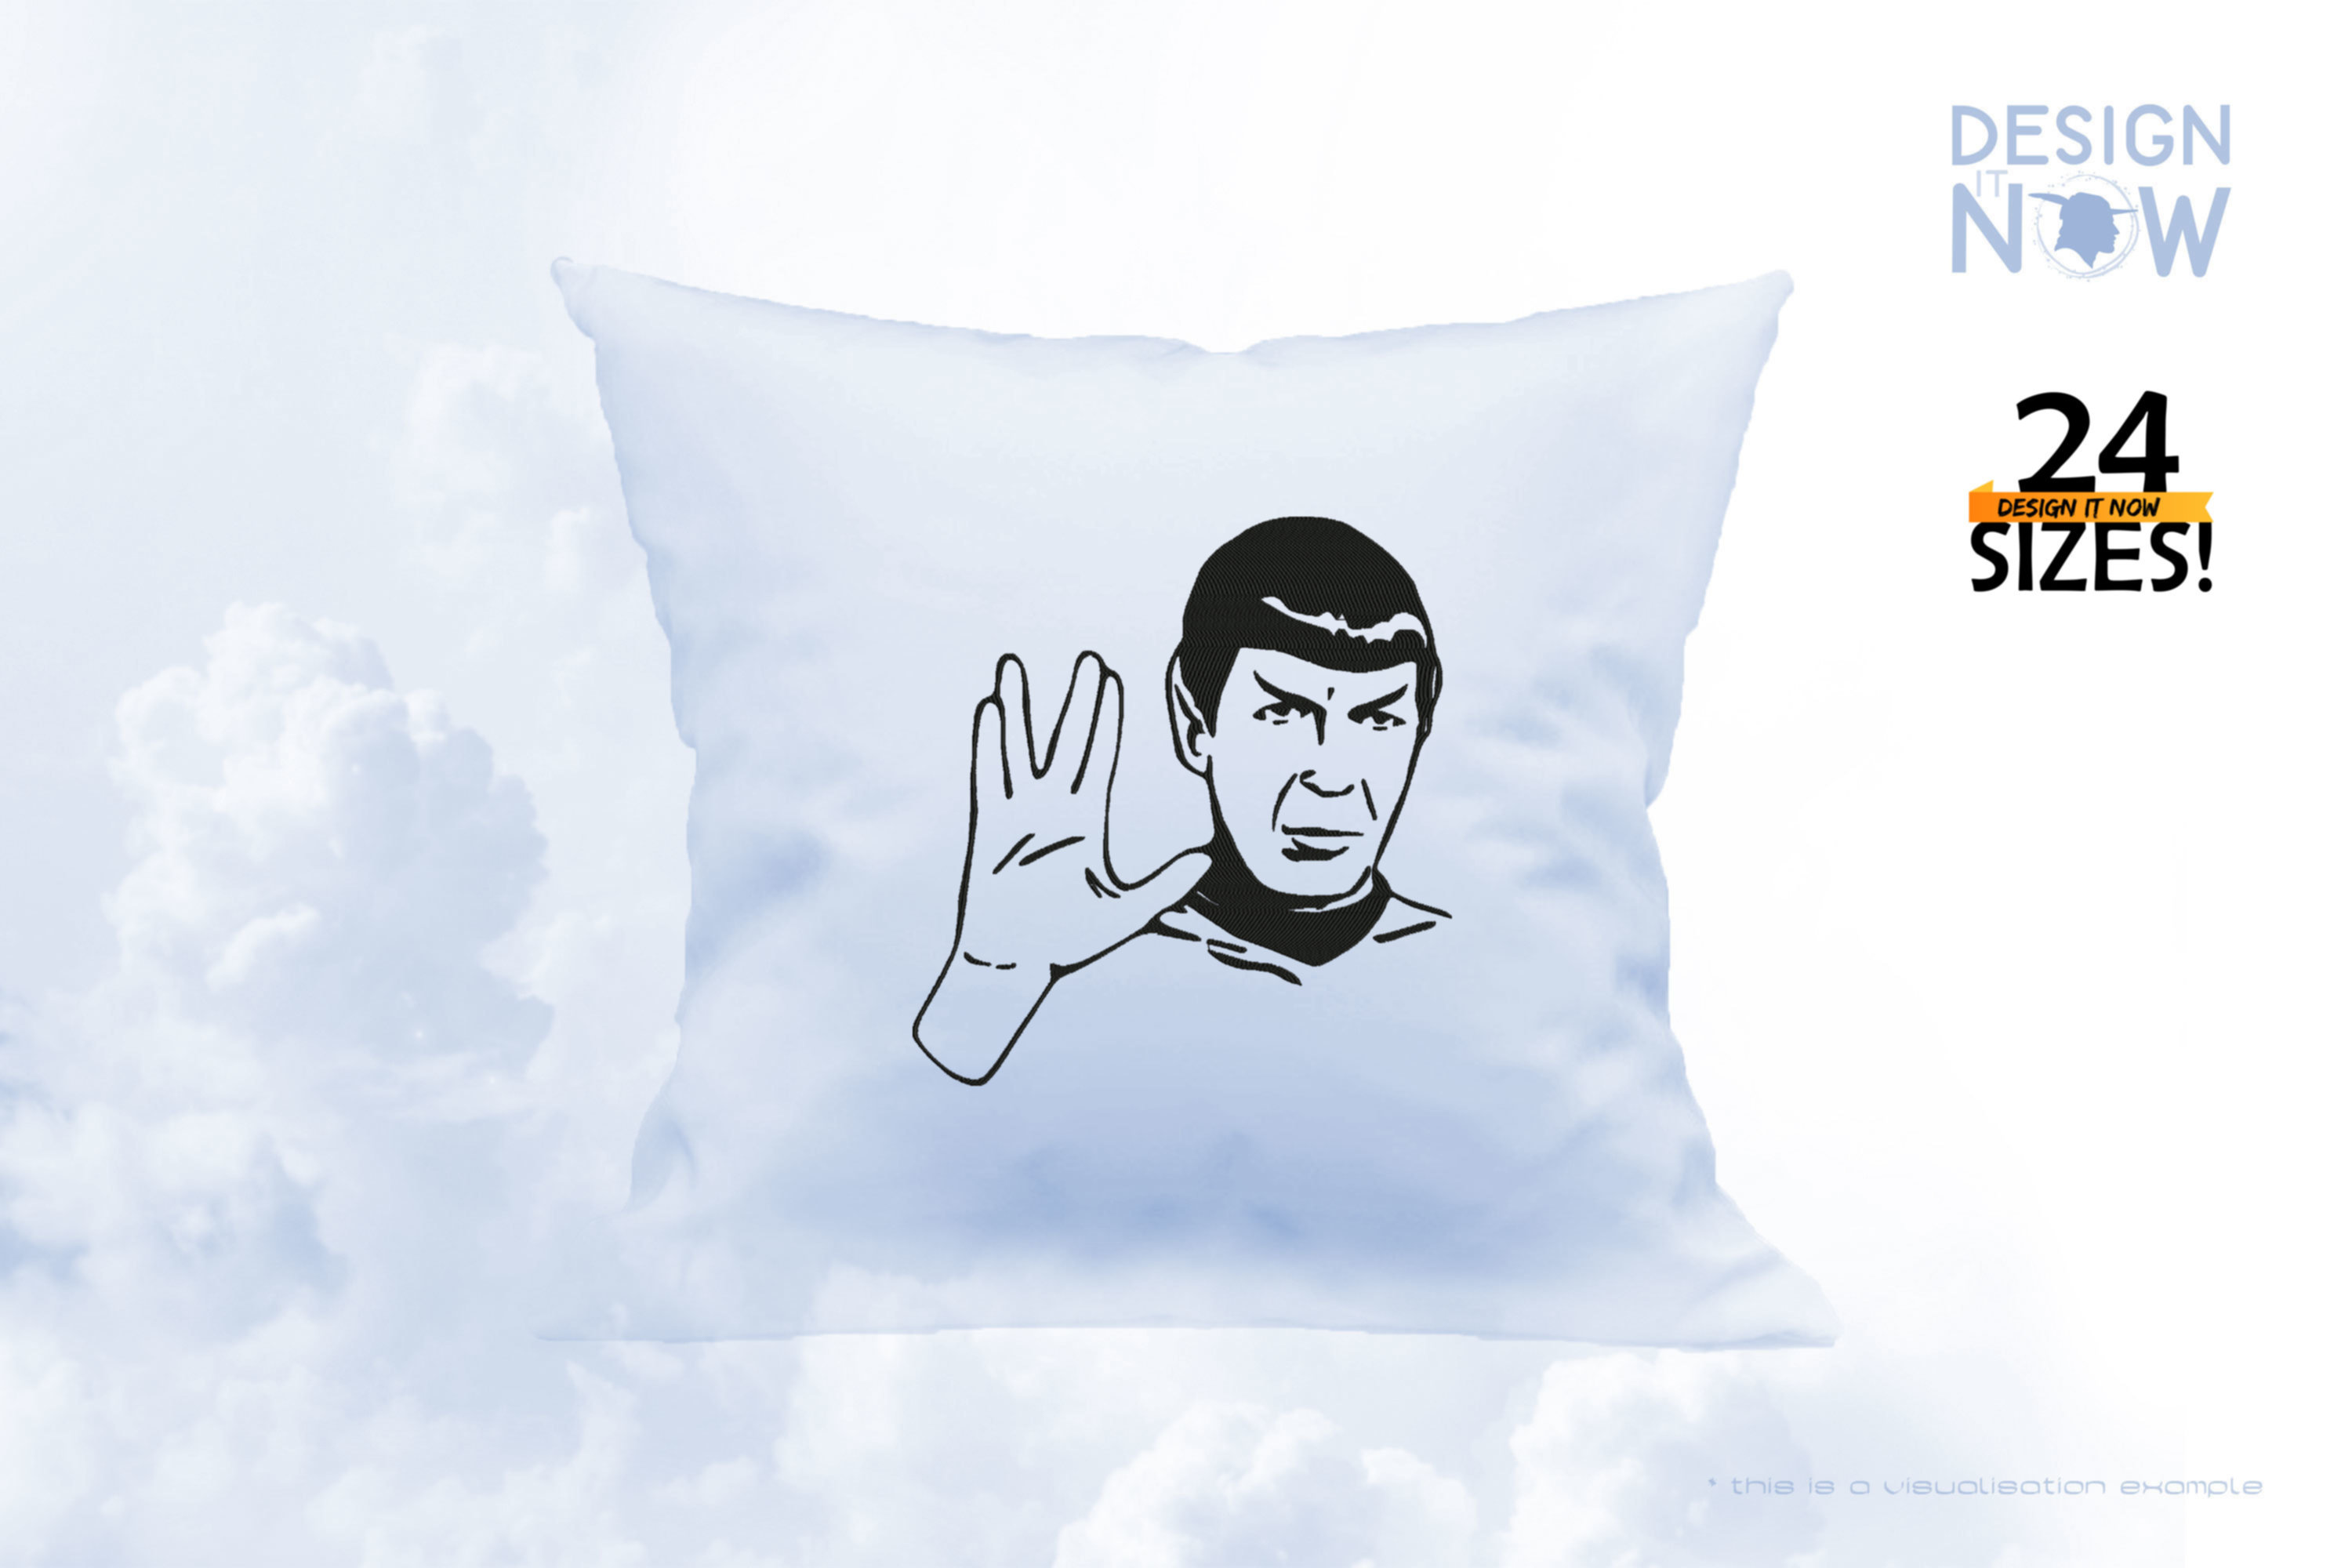 Tribut To Fictional Character Spock aka Spock